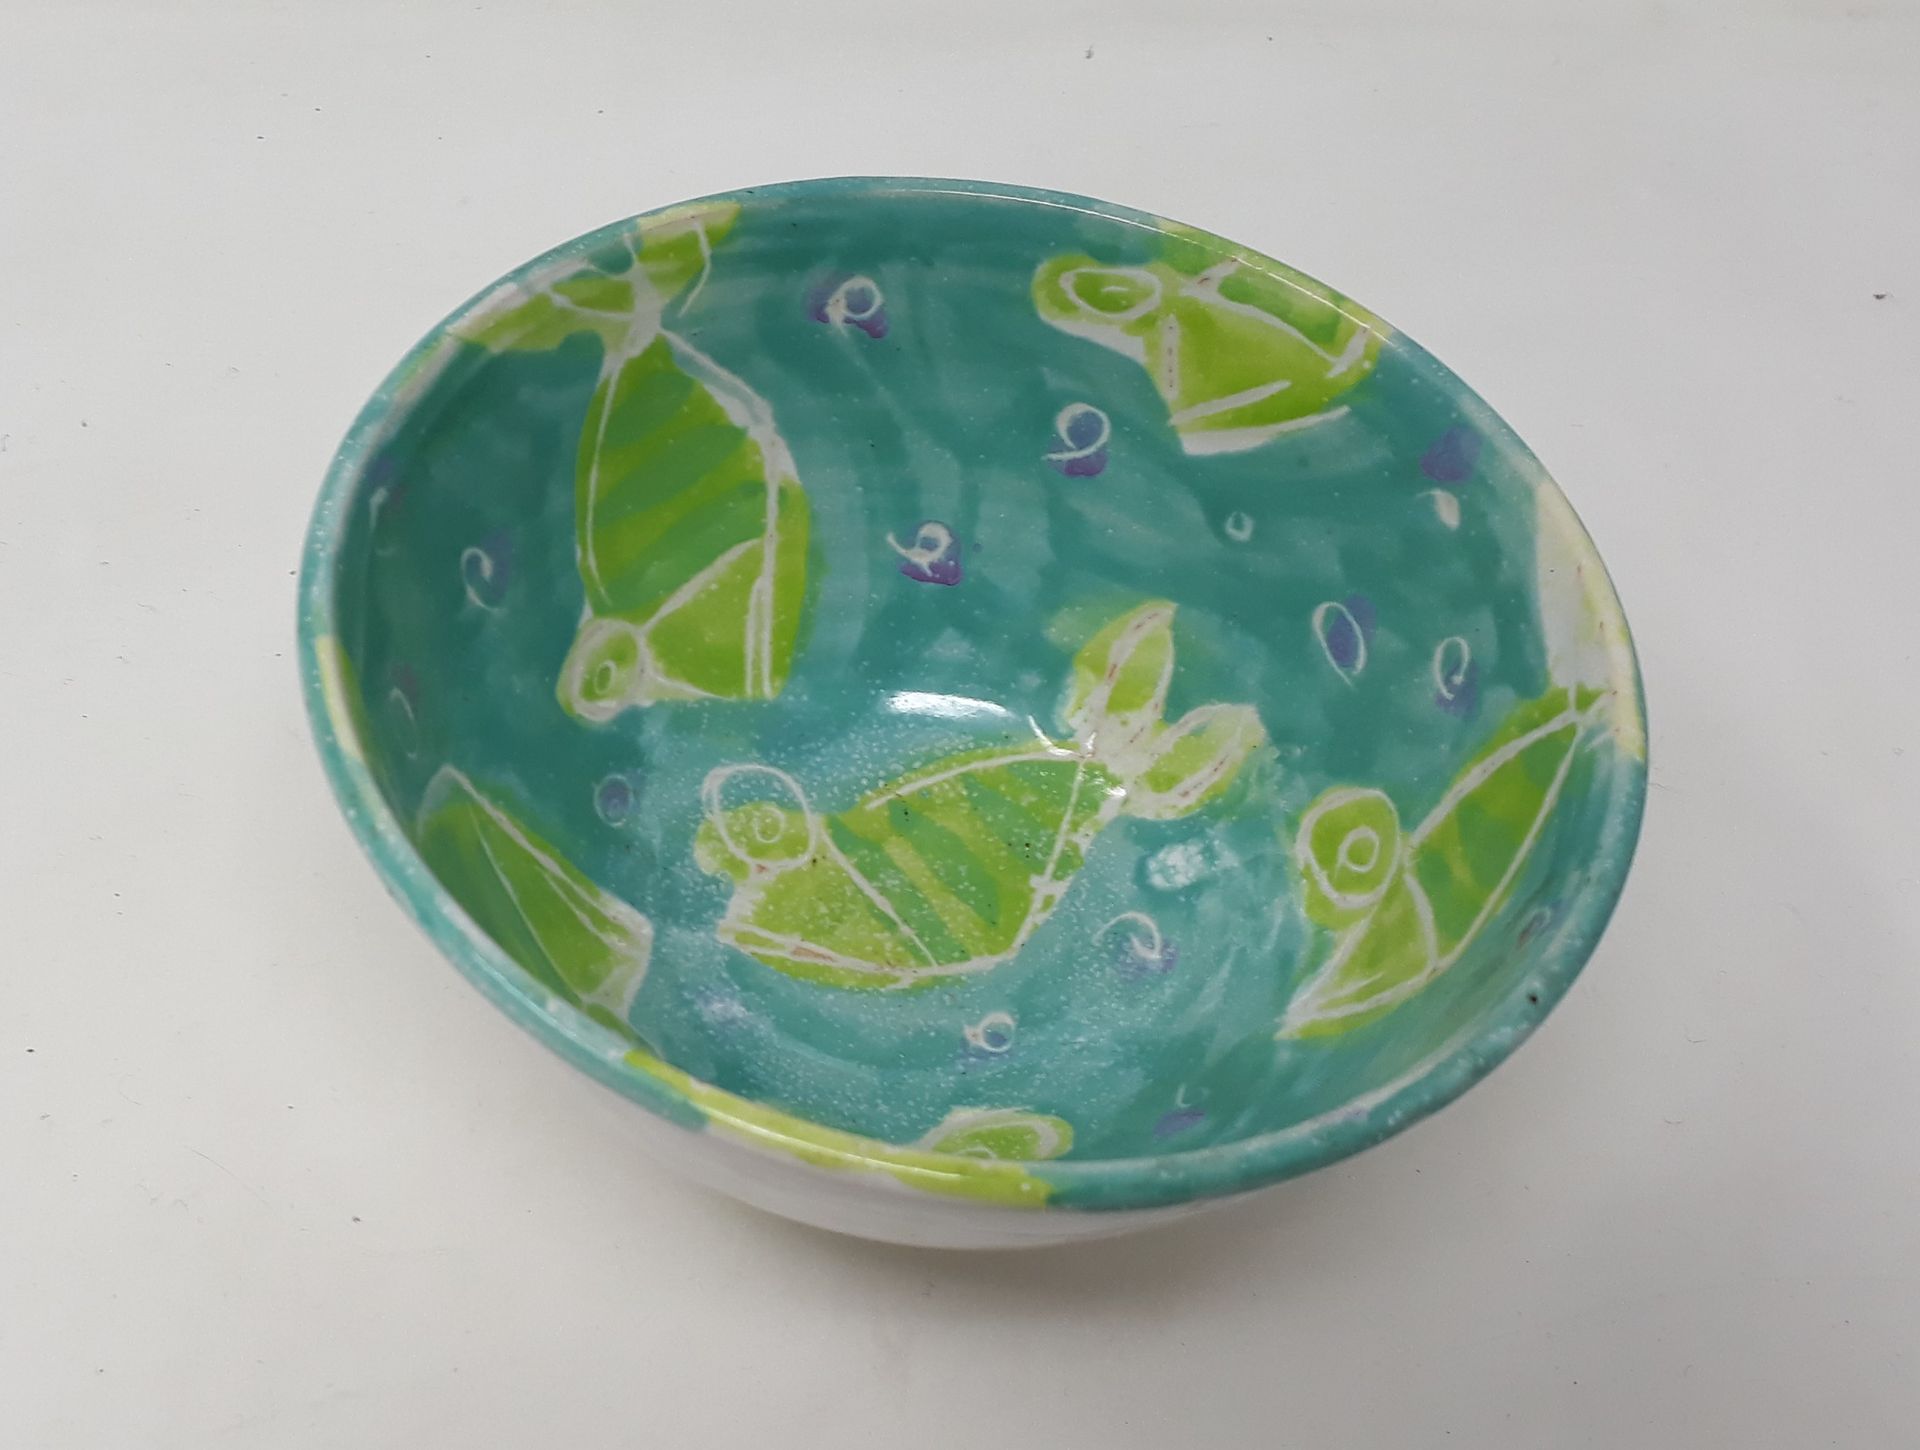 Null ALTZWEIG Susanne (1959)

Earthenware bowl decorated with green fish on a bl&hellip;